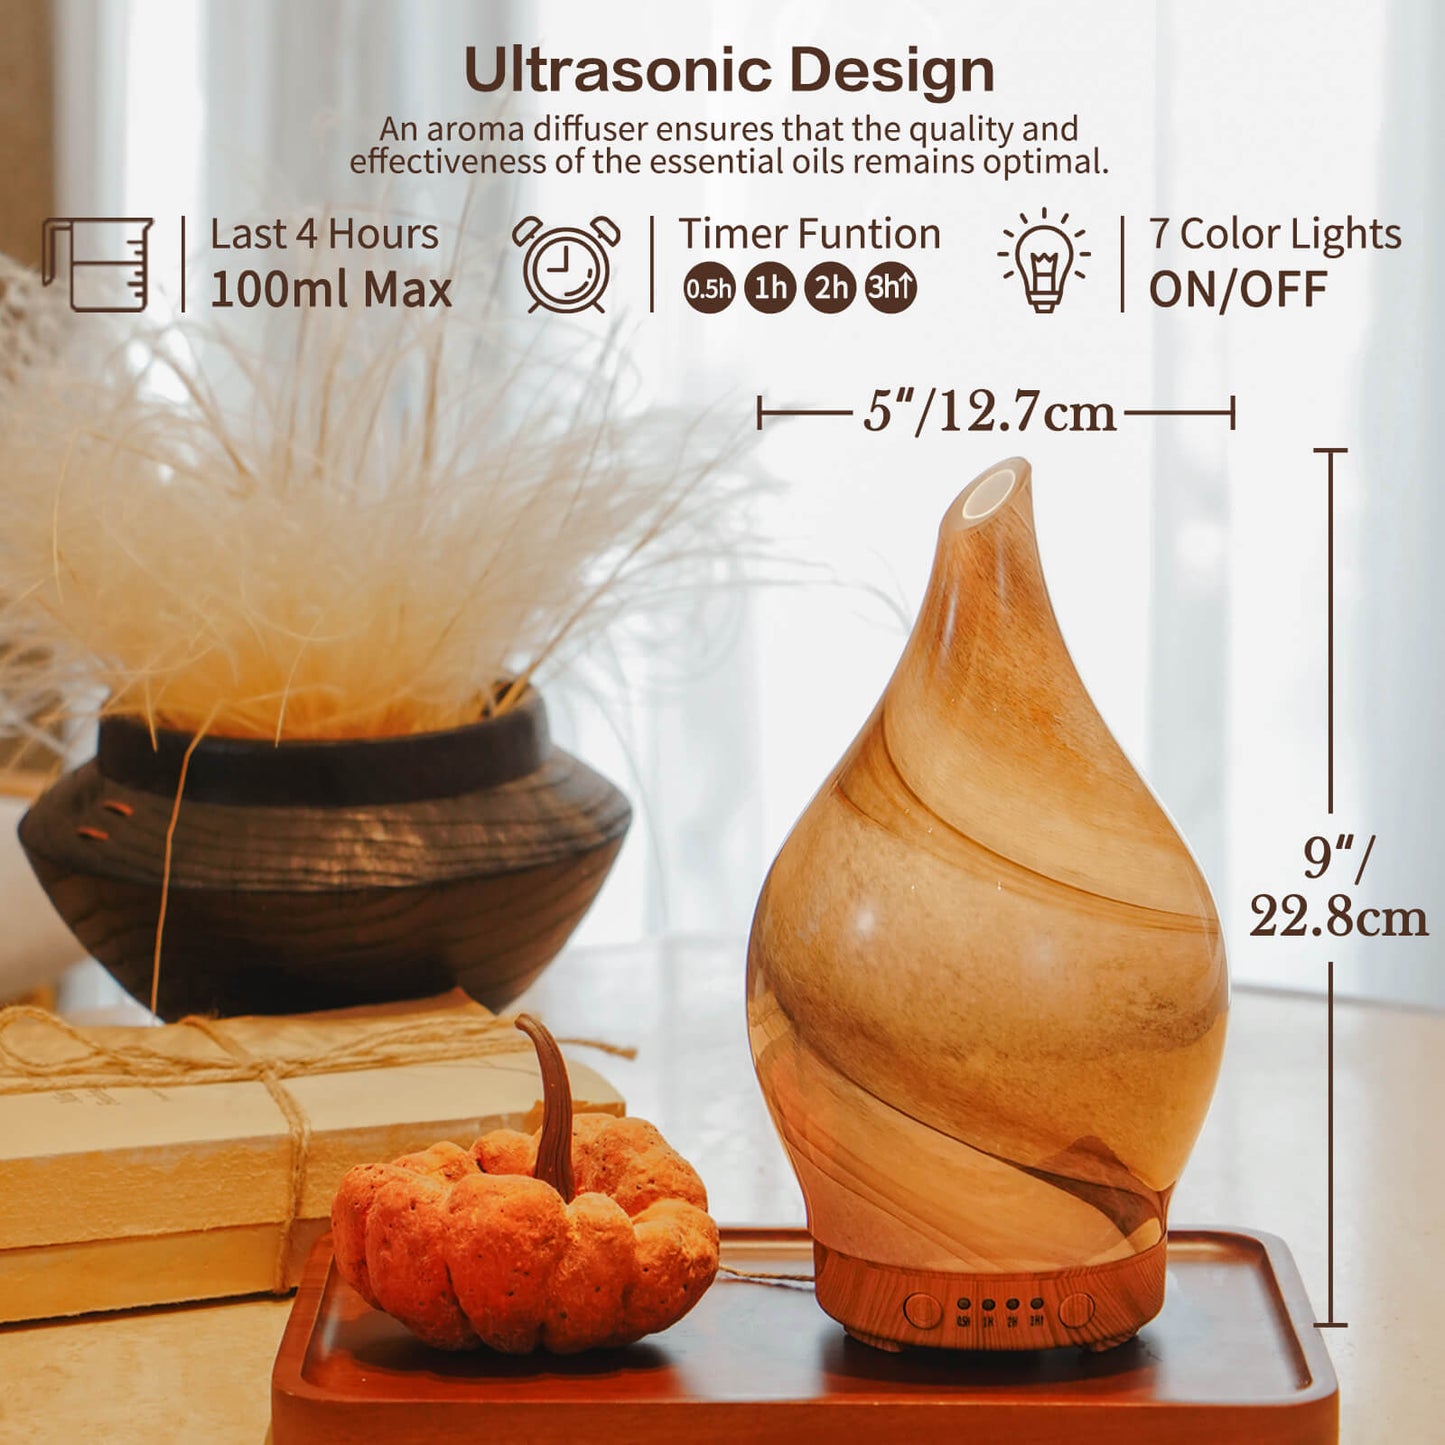 Porseme 100ml Essential Oil Diffuser Glass Color Changing Aroma Air Diffusers Aromatherapy Ultrasonic Cool Mist Humidifier 4 Running Hours Waterless Auto-Off for Sleeping, Yoga, Office, Spa (Desert)